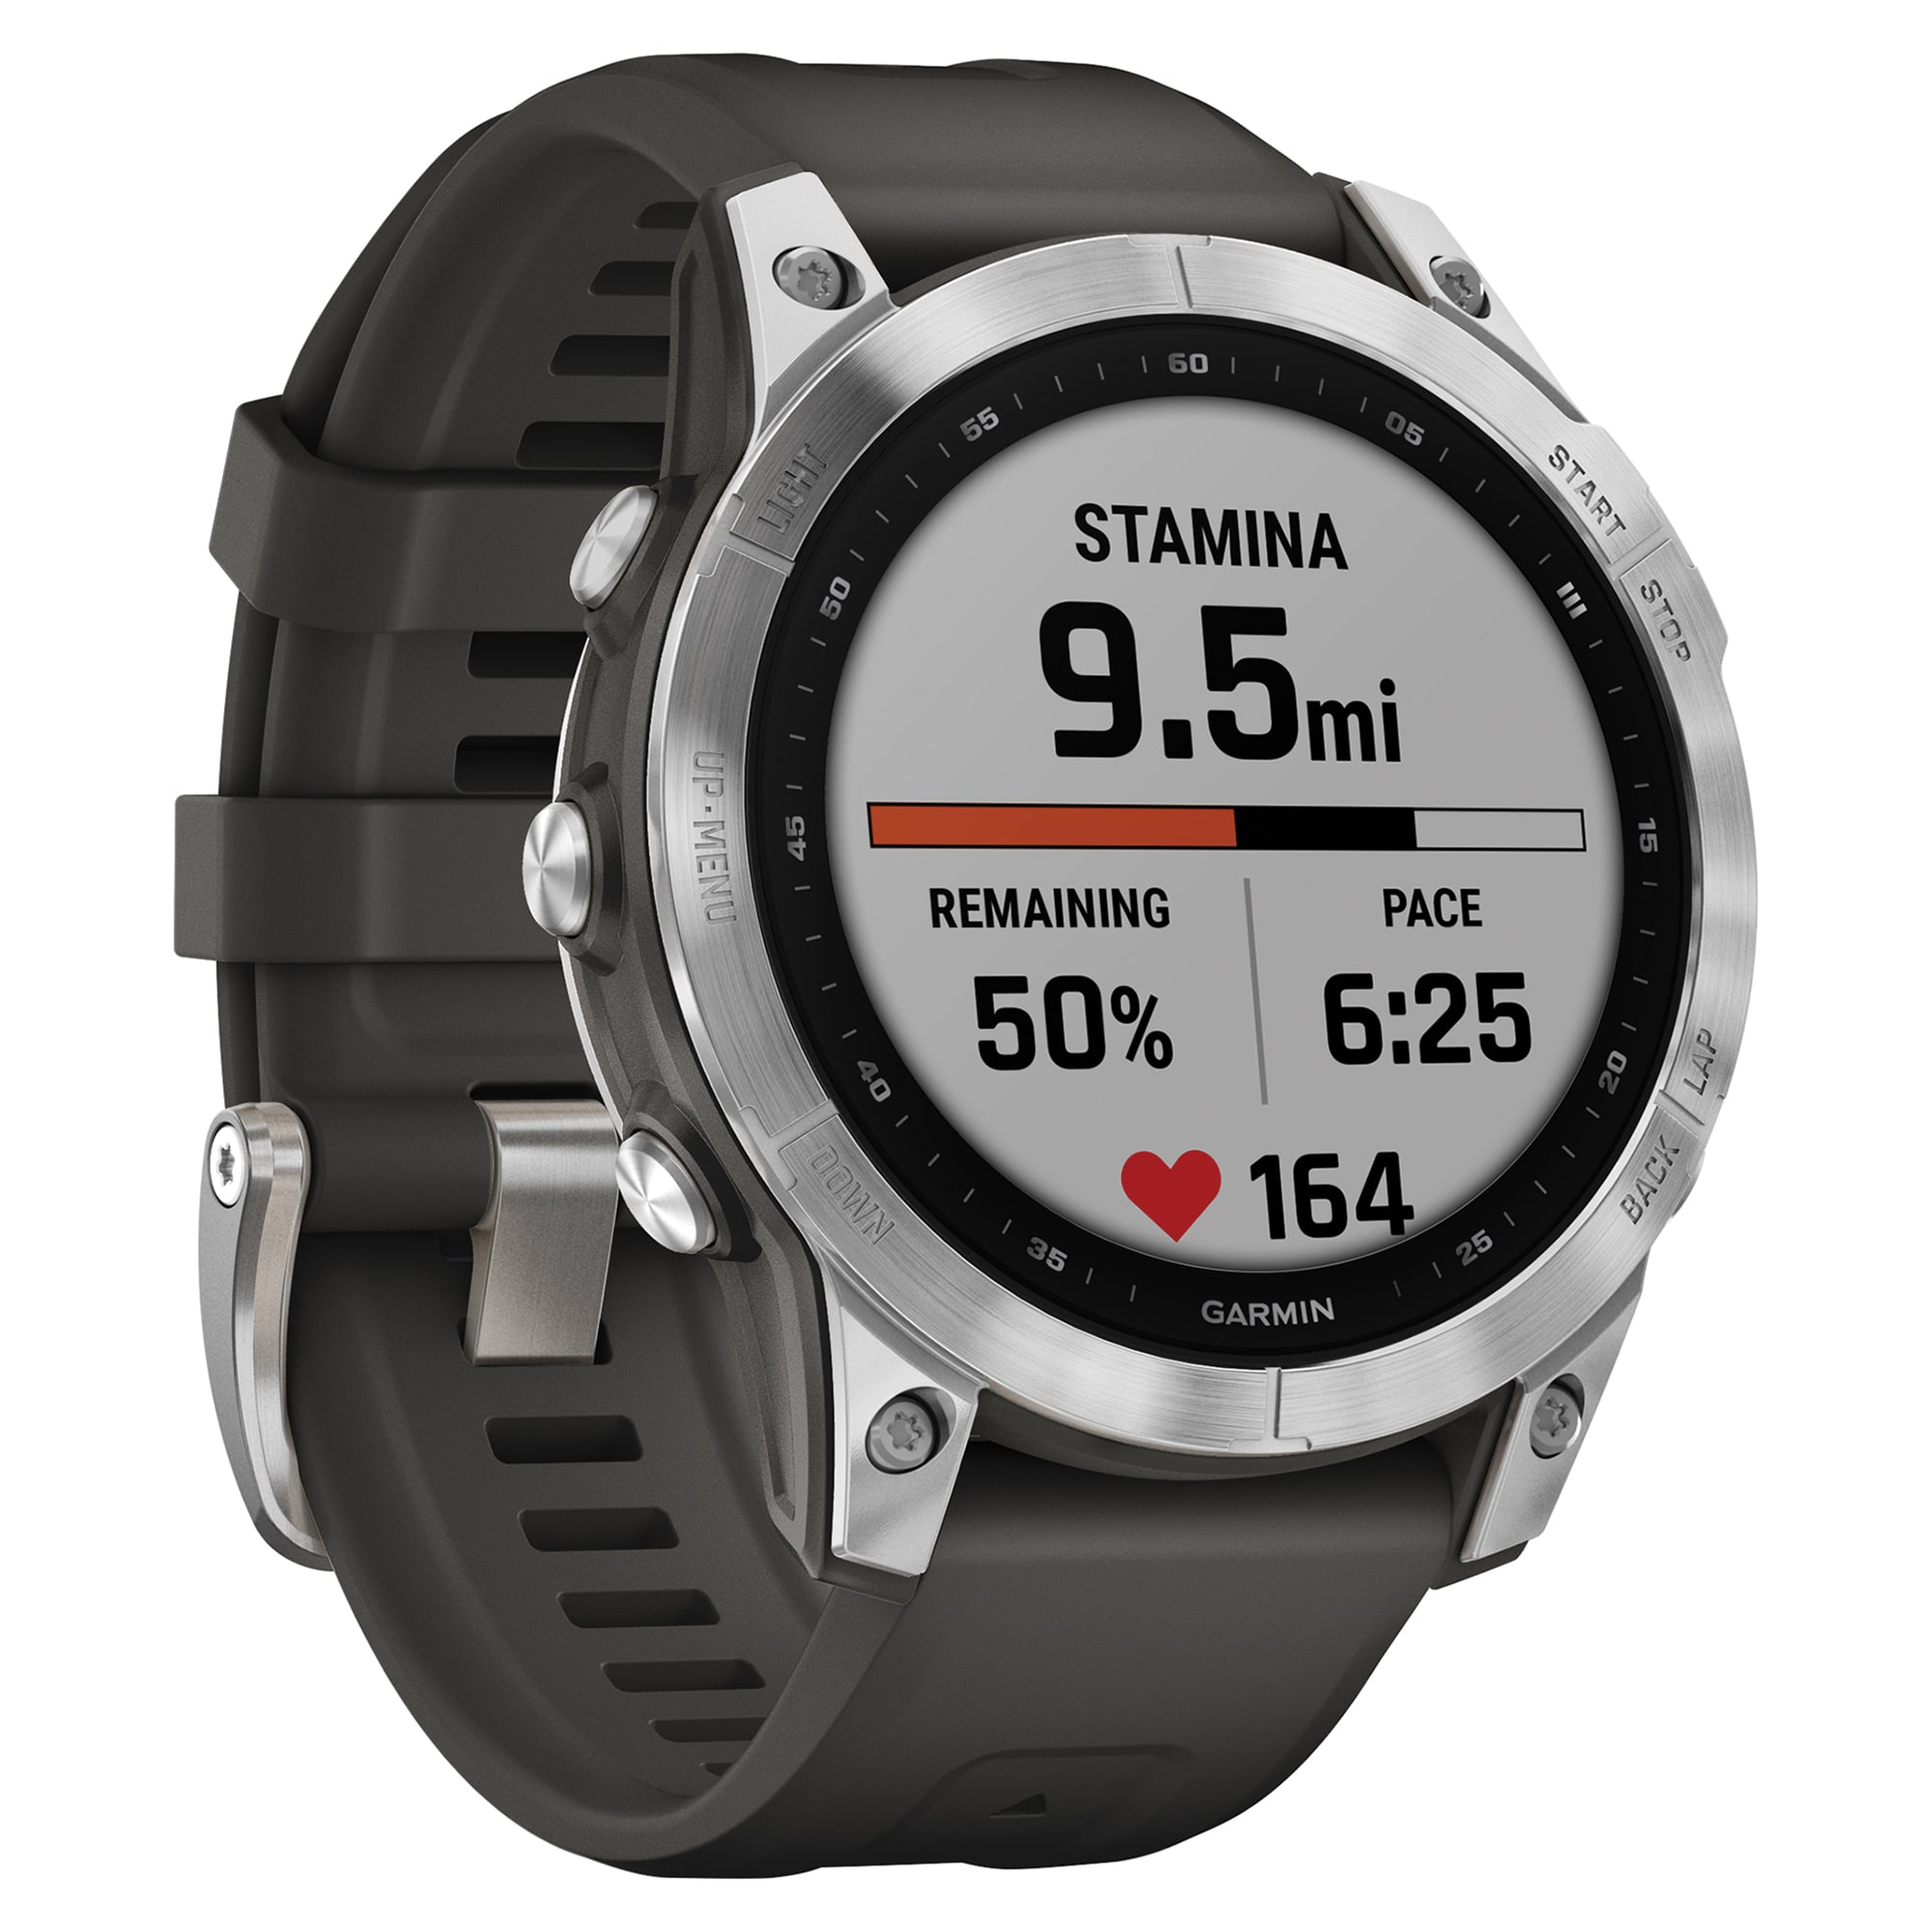 Smart Heart Enabled with at Trackers Rate the Gps fenix Step Garmin Watch Counter, 7 department Fitness in and Monitor